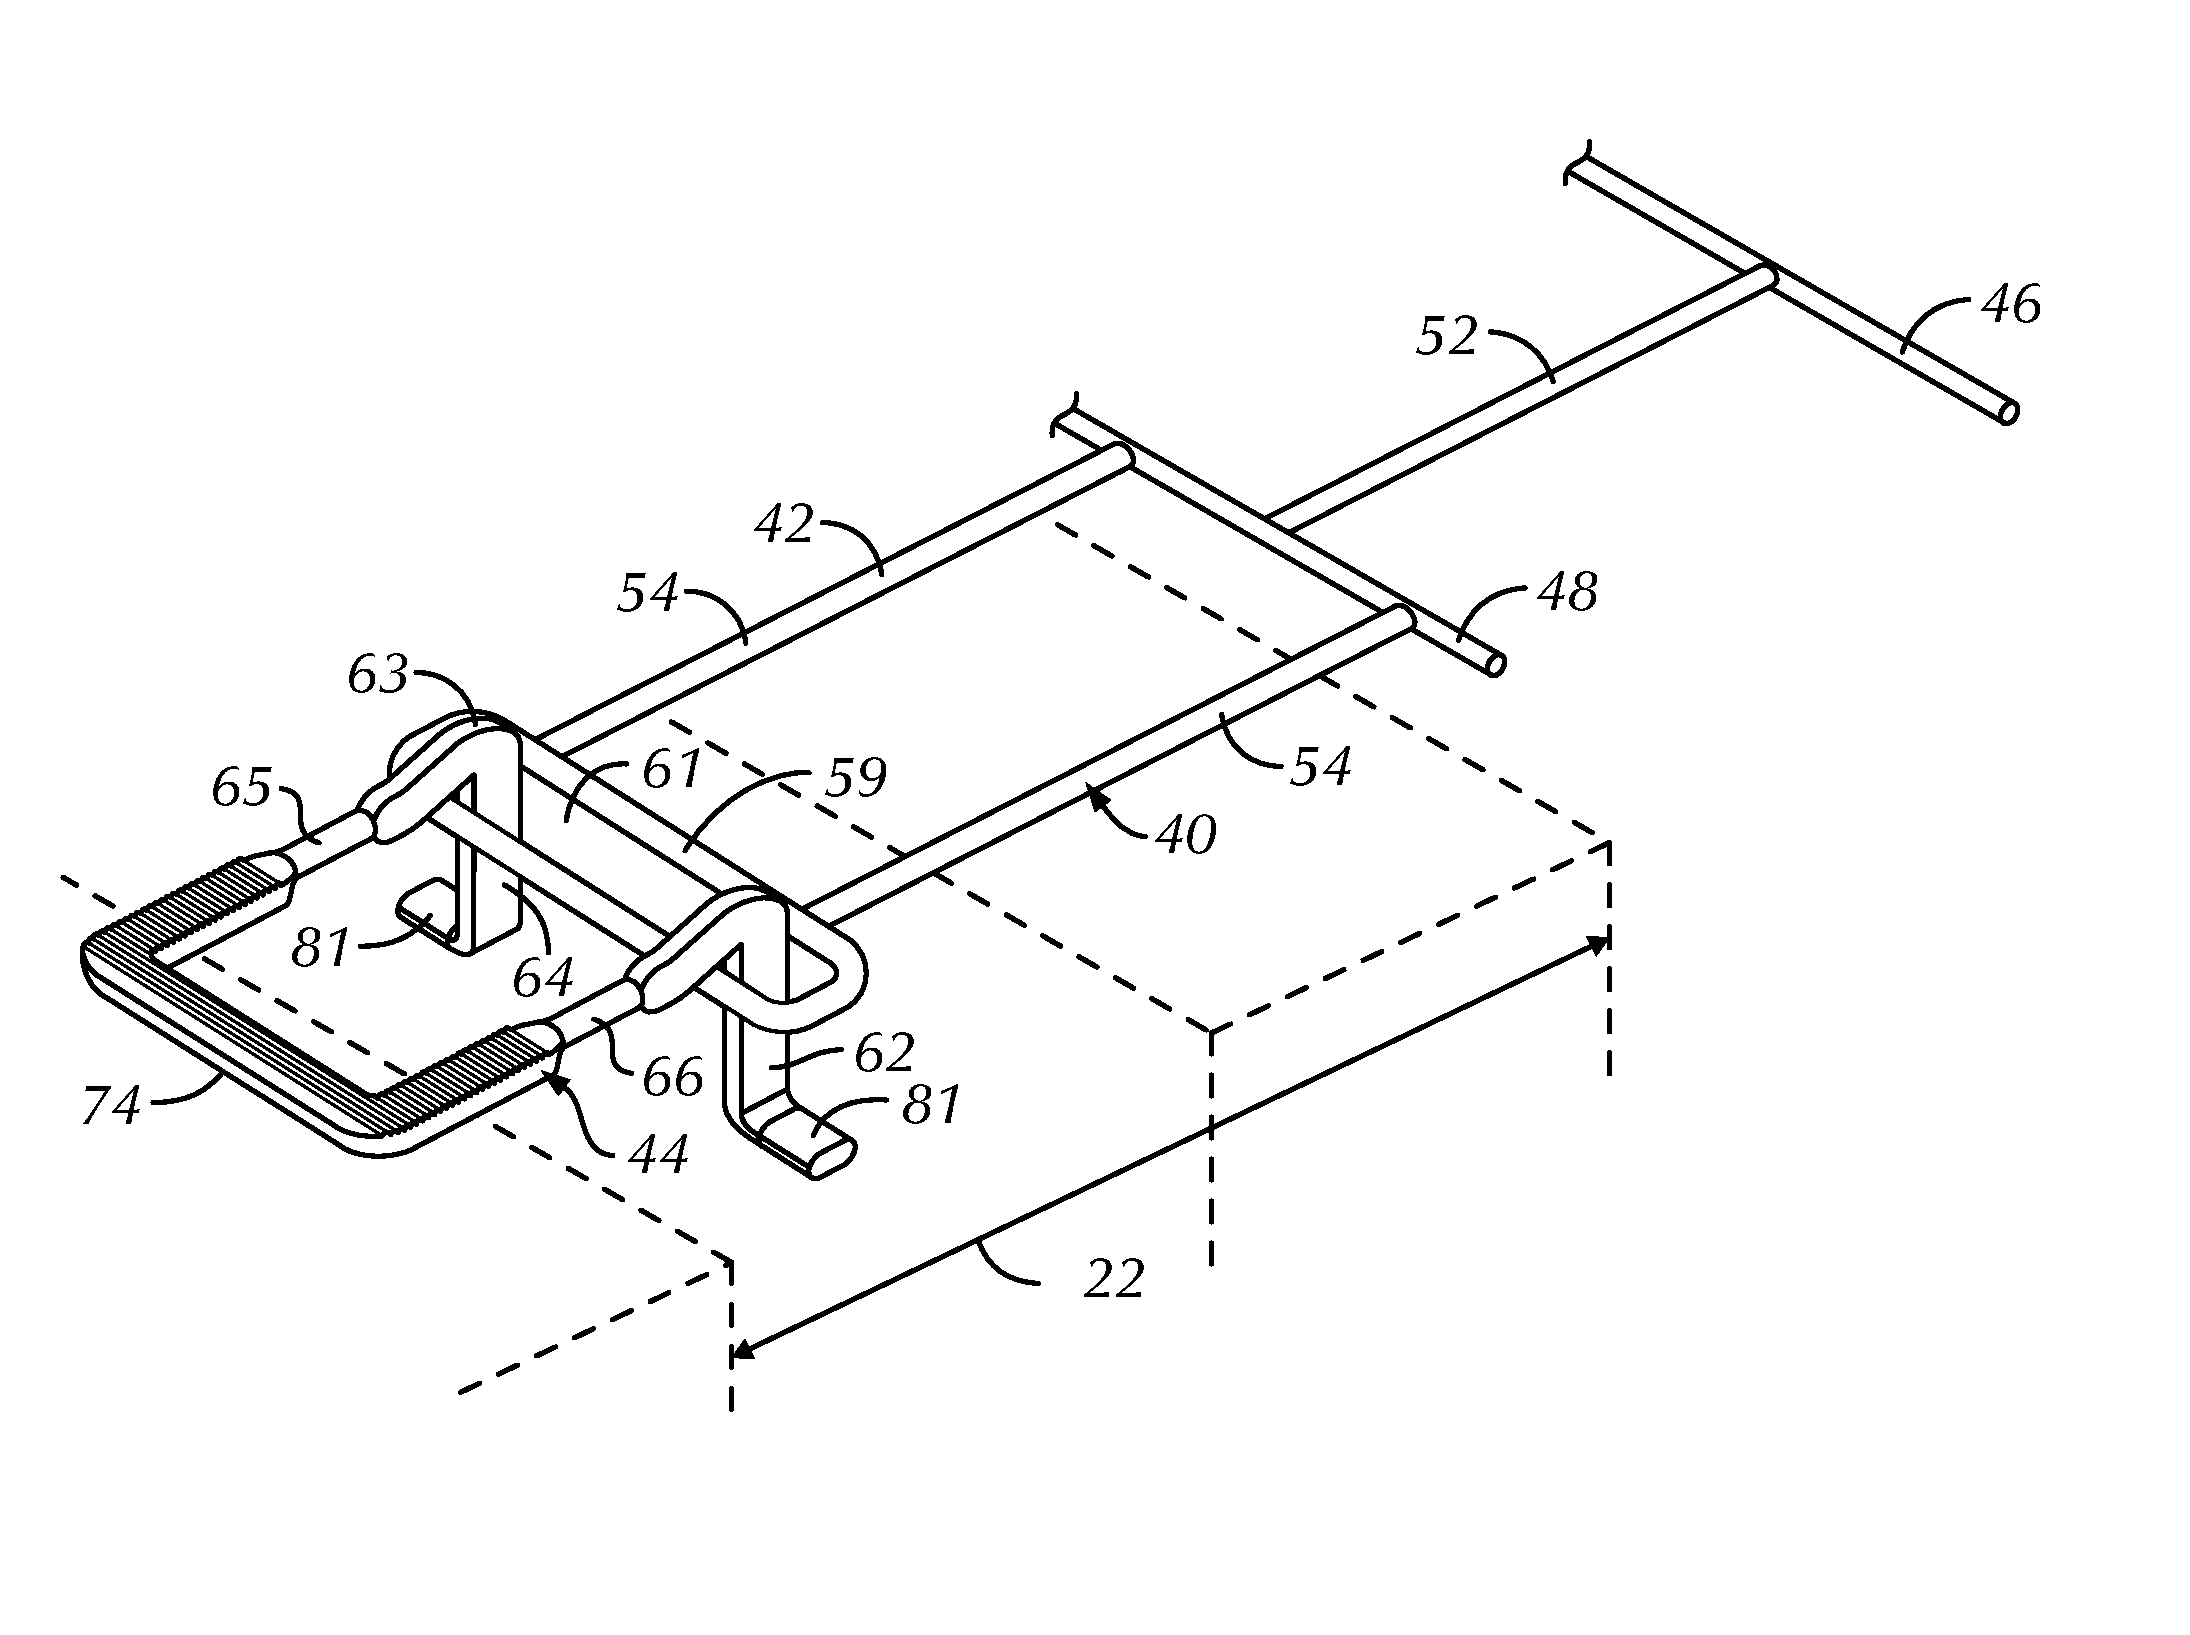 Low profile pullout resistant pintle and anchoring system utilizing the same